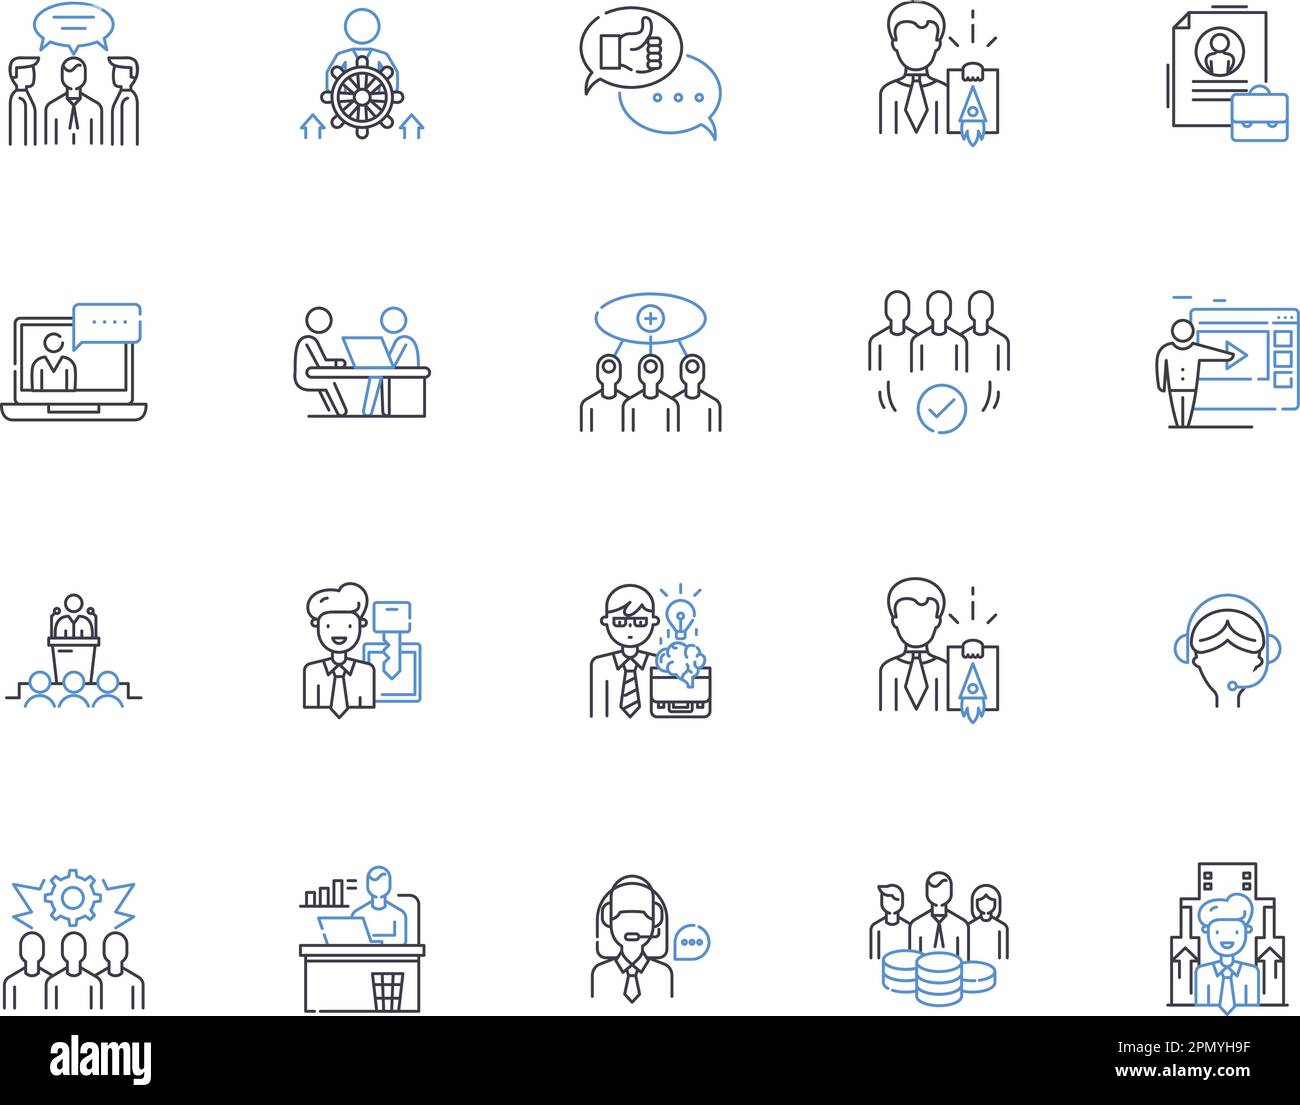 Empoyee outline icons collection. Employee, Staff, Worker, Personel, Team, Member, Associate vector and illustration concept set. Colleague, Personnel Stock Vector